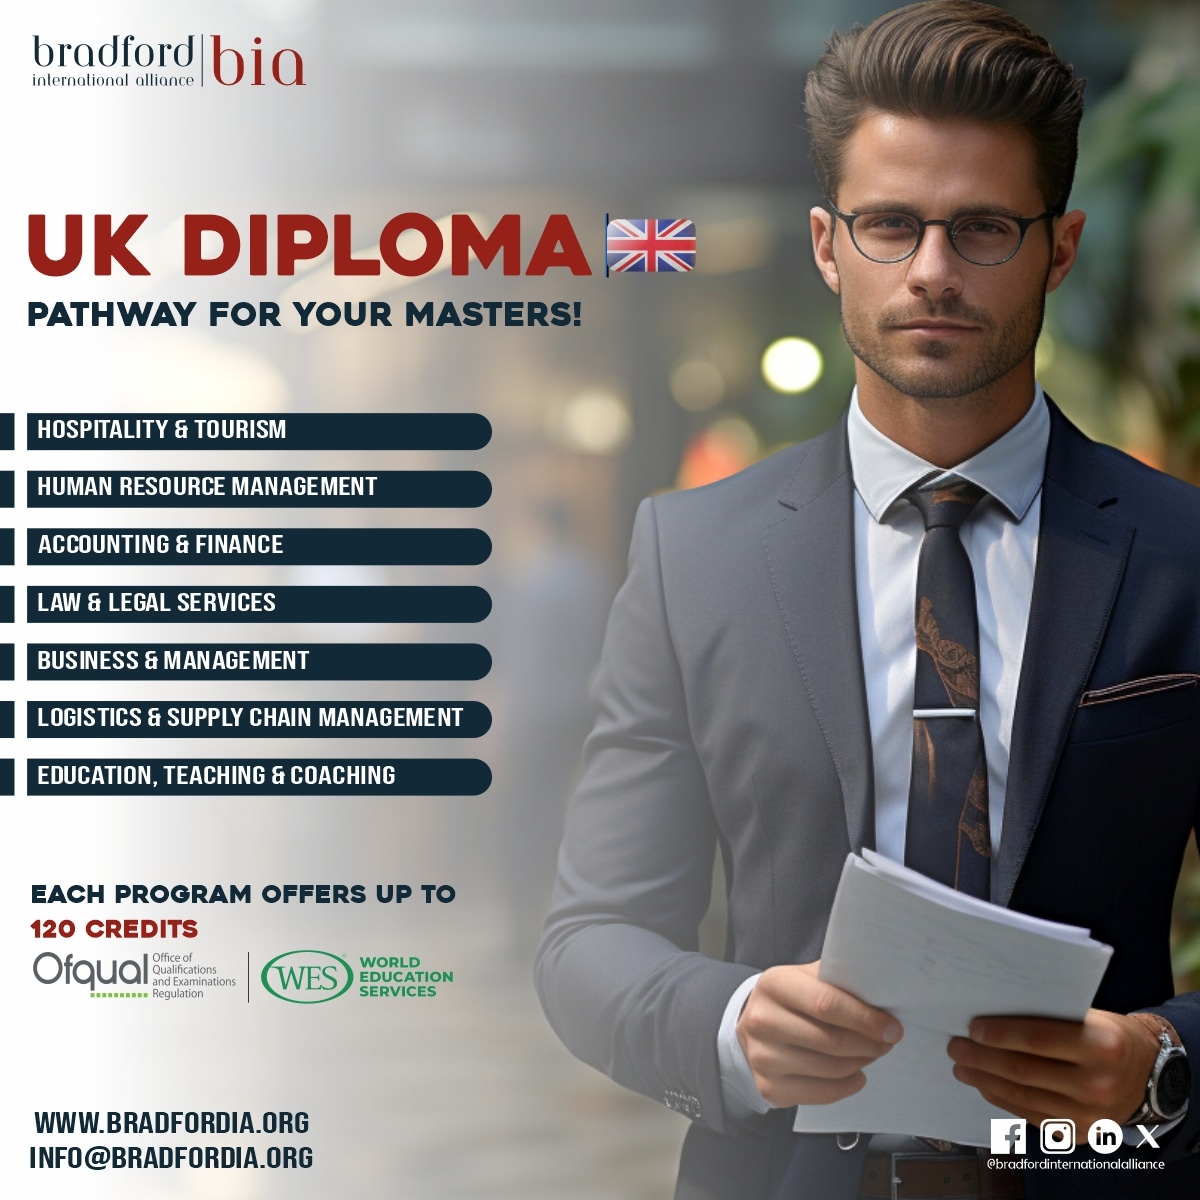 Dreaming of a Master's degree? Our UK diploma courses are your stepping stone! 🚀 Earn up to 120 credits recognized by Ofqual & WES, getting you closer to your academic goals. 📚 Study online at your pace. Make your dream a reality! #UKDiploma #OnlineLearning #Ofqual #WES